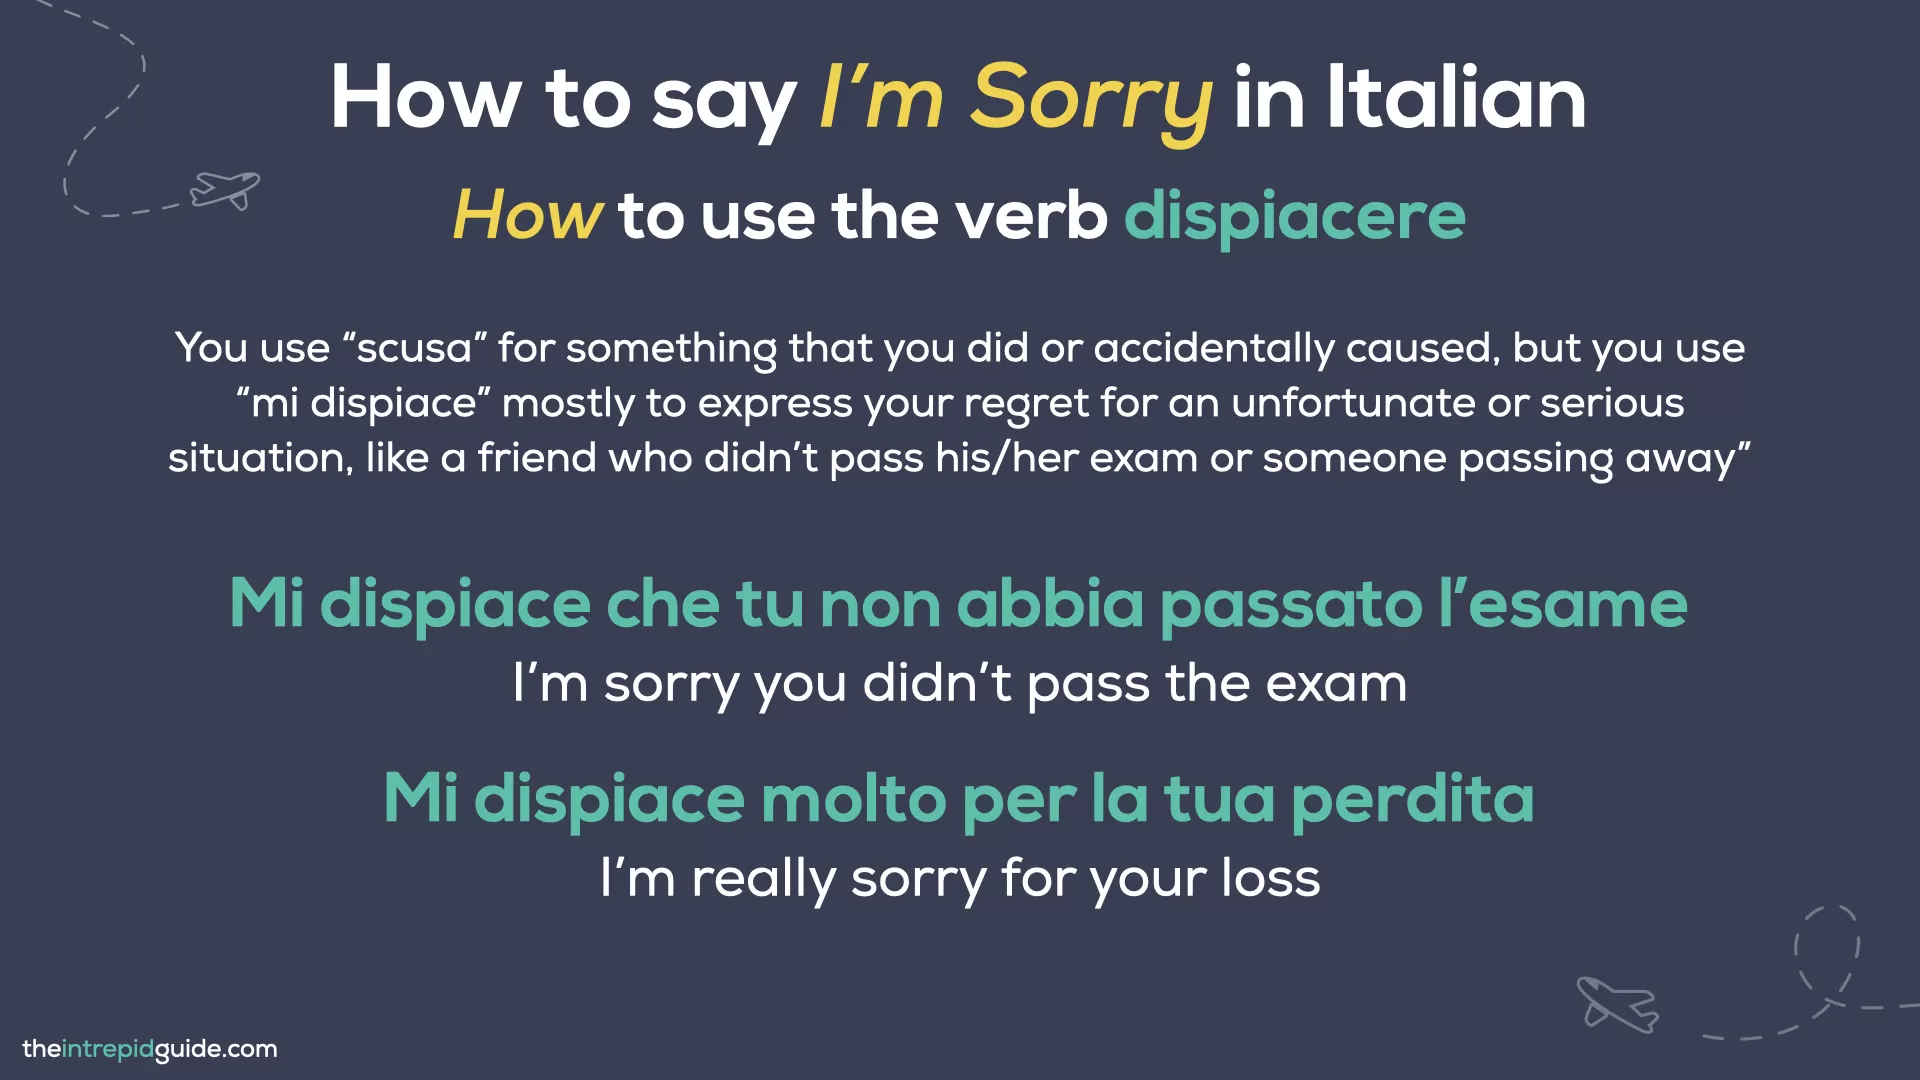 I'm sorry in Italian - How to use the verb dispiacere